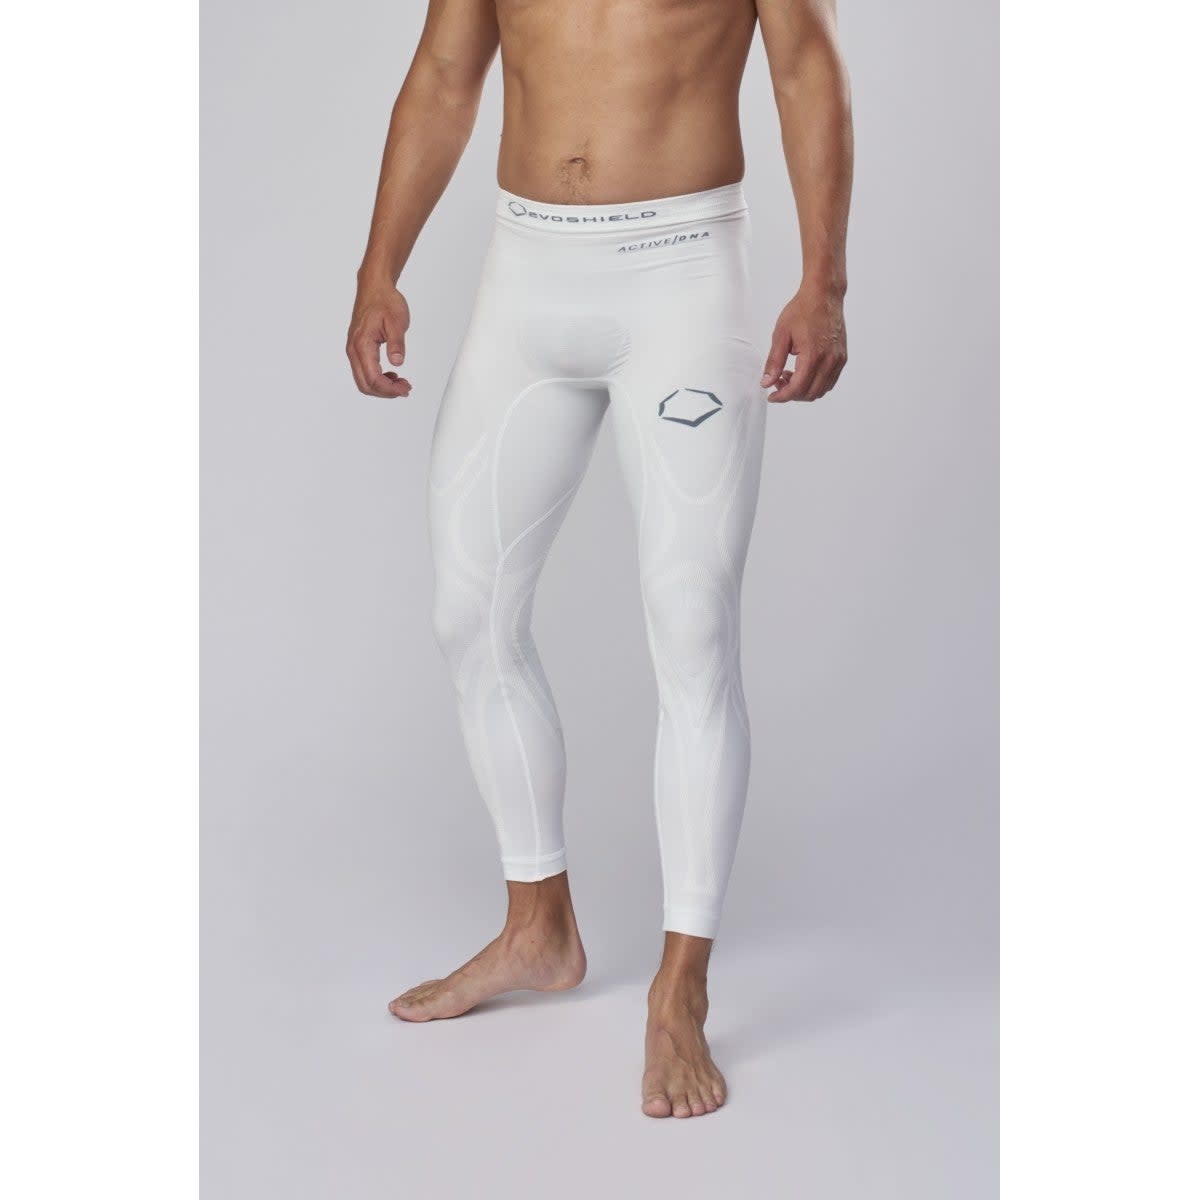 Copy of Evoshield recovery DNA compression tight pants